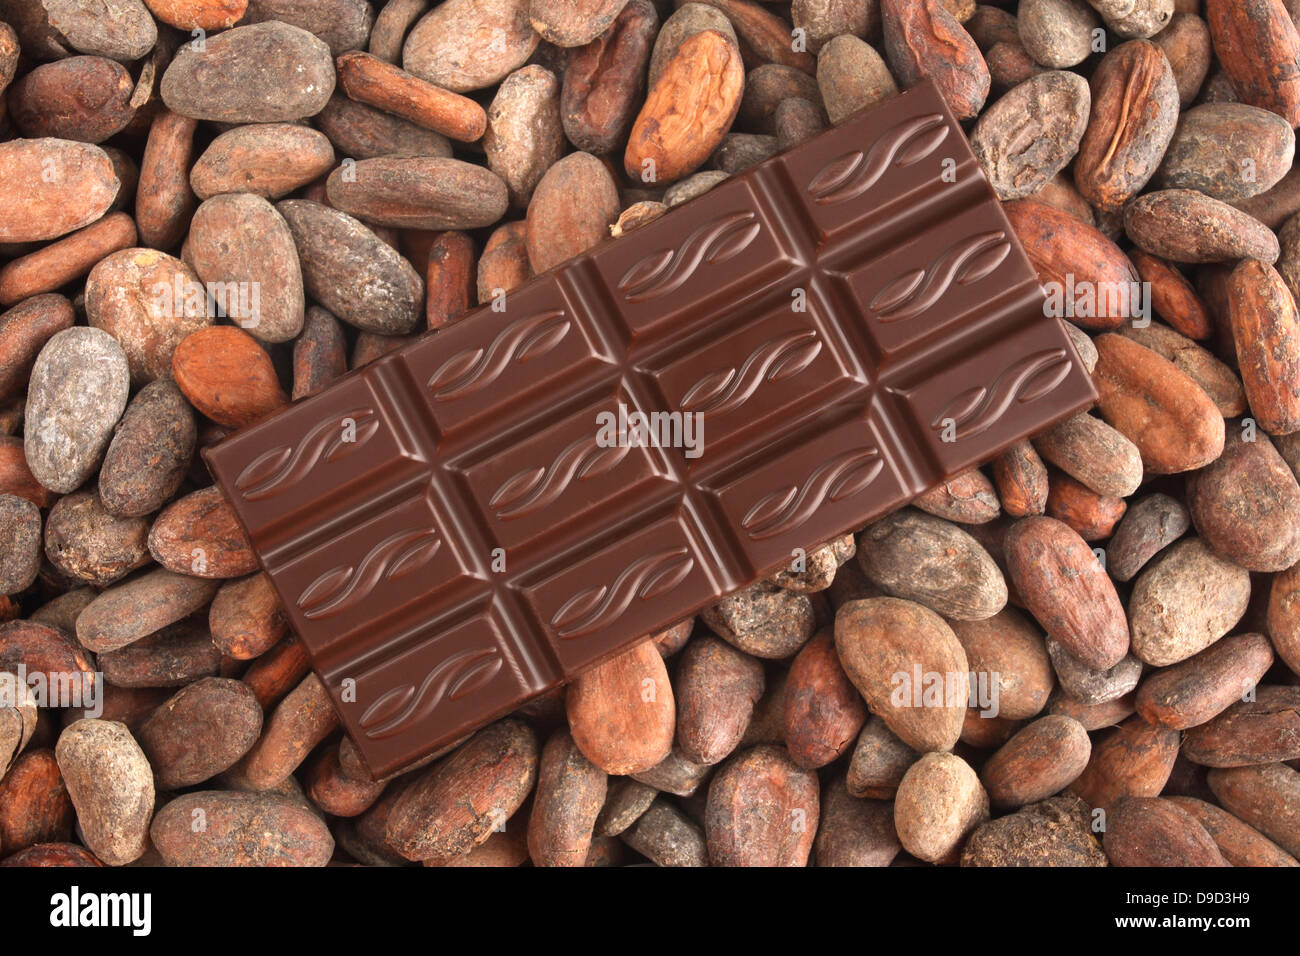 Plain chocolate with cacao beans Stock Photo